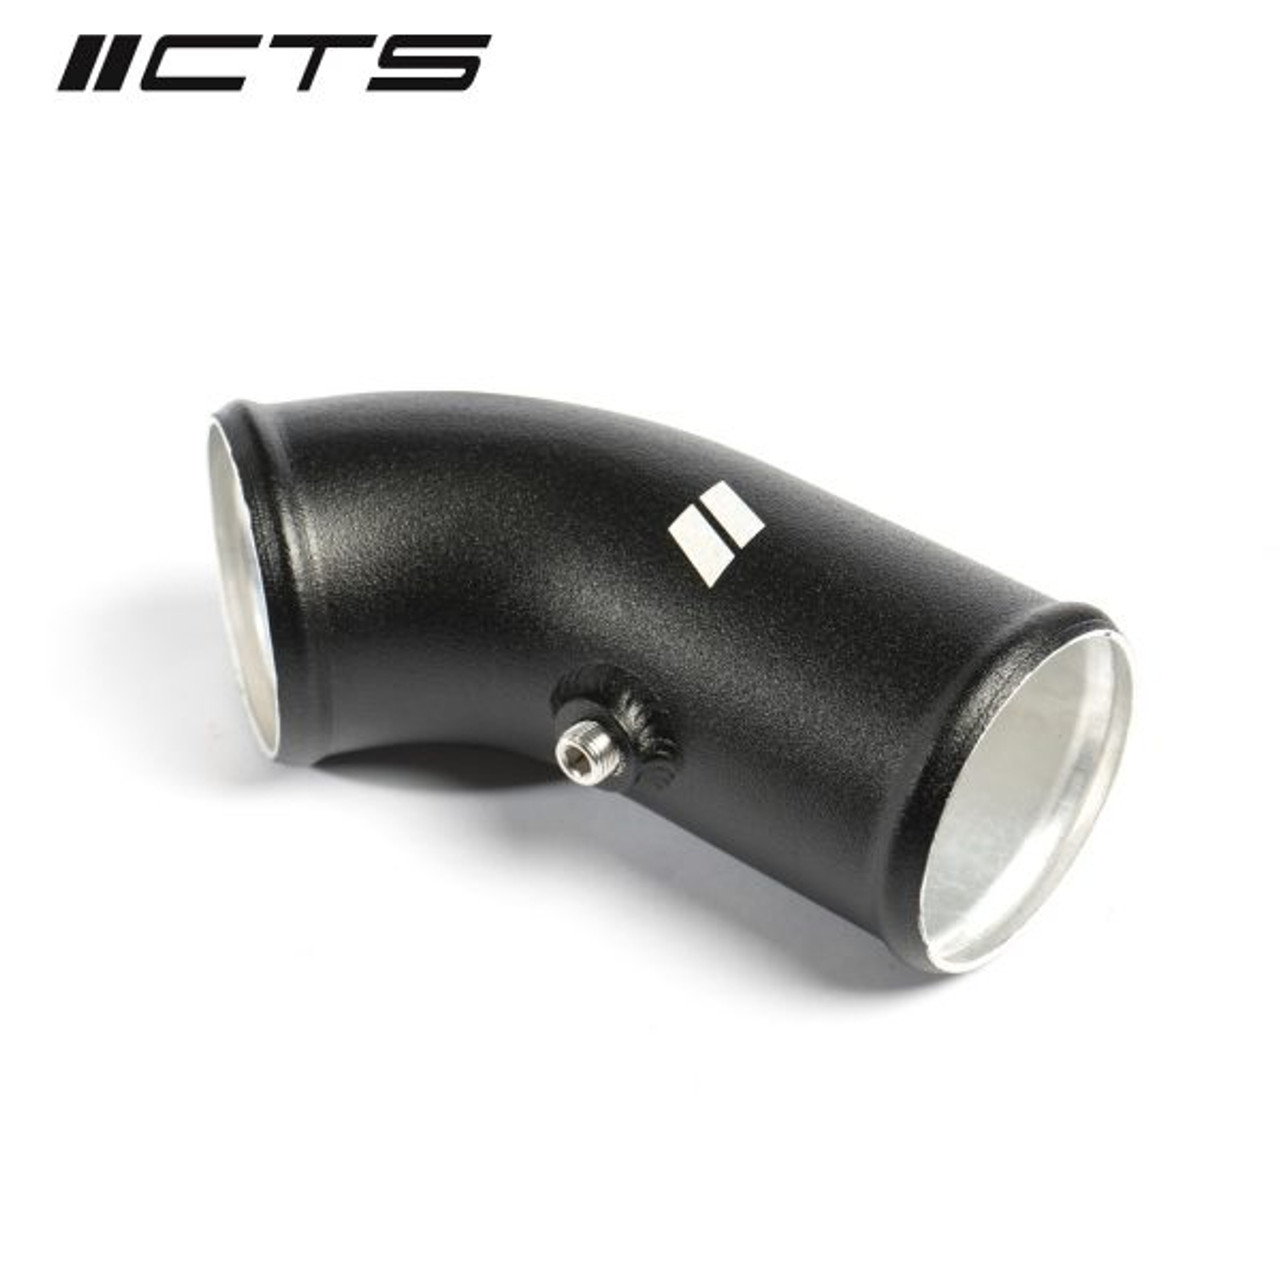 BMW Chargepipe Upgrade Kit - CTS Turbo CTS-IT-820